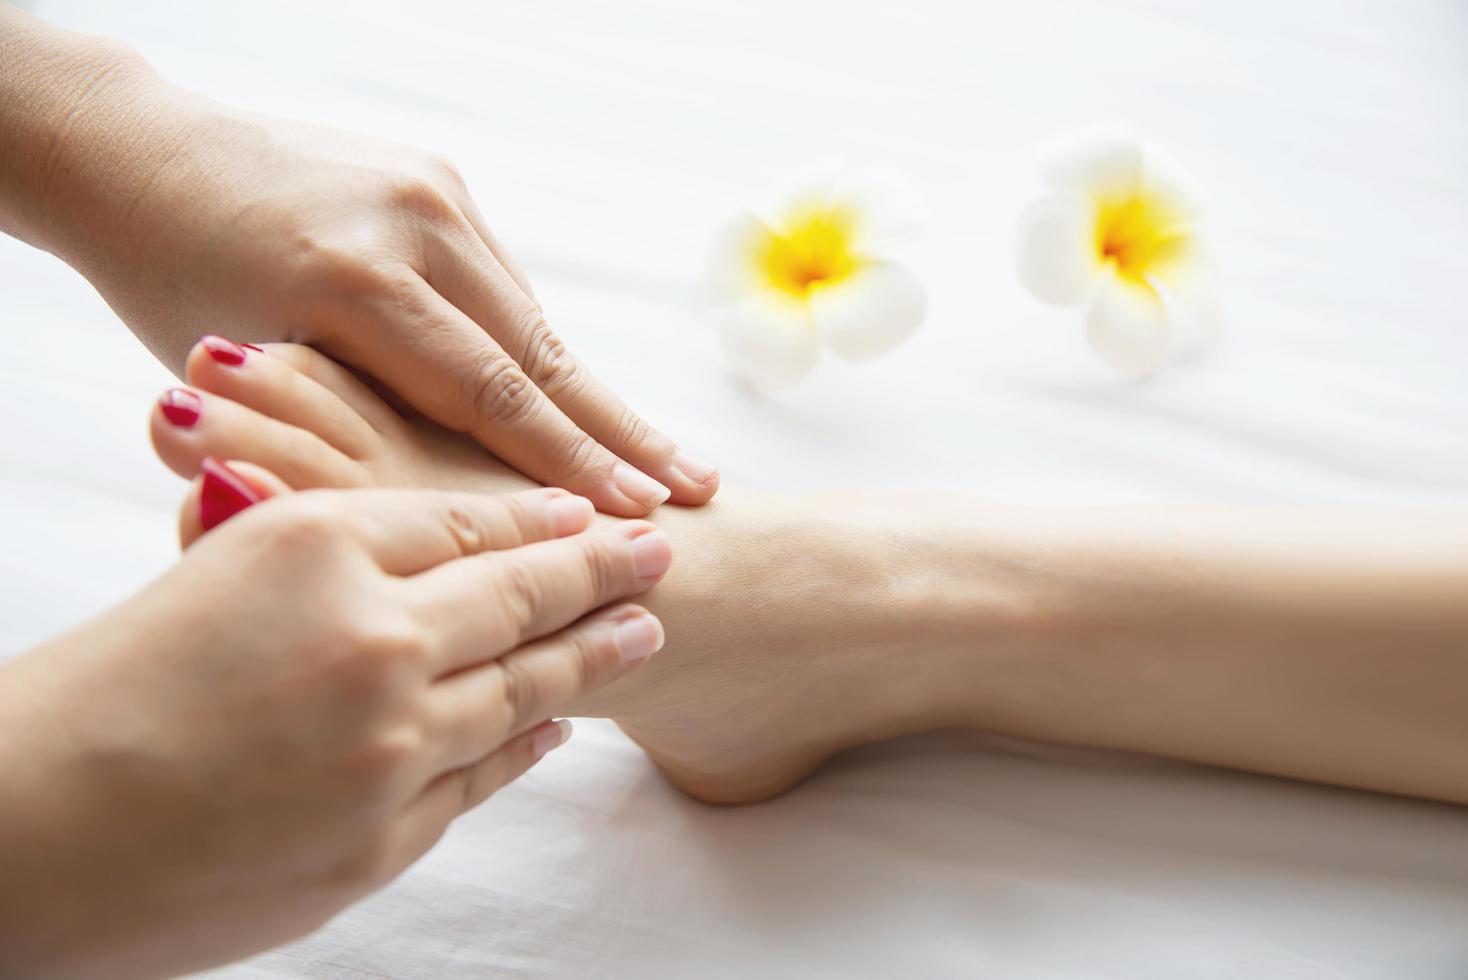 Woman receiving foot massage service from masseuse close up at hand and foot - relax in foot massage therapy service concept photo